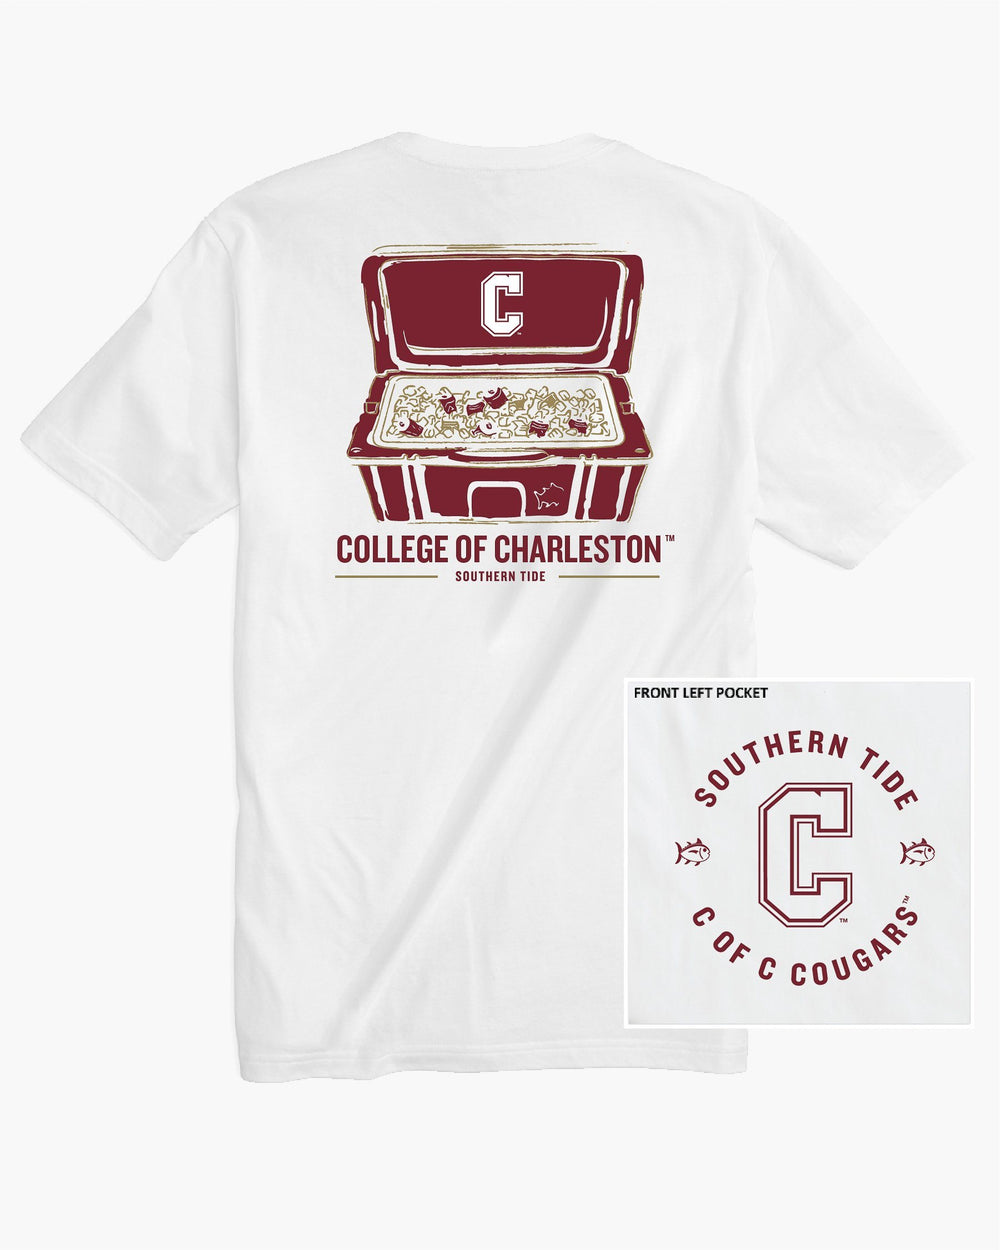 The back of the Men's College of Charleston Cougars Cooler Short Sleeve T-Shirt - Classic White